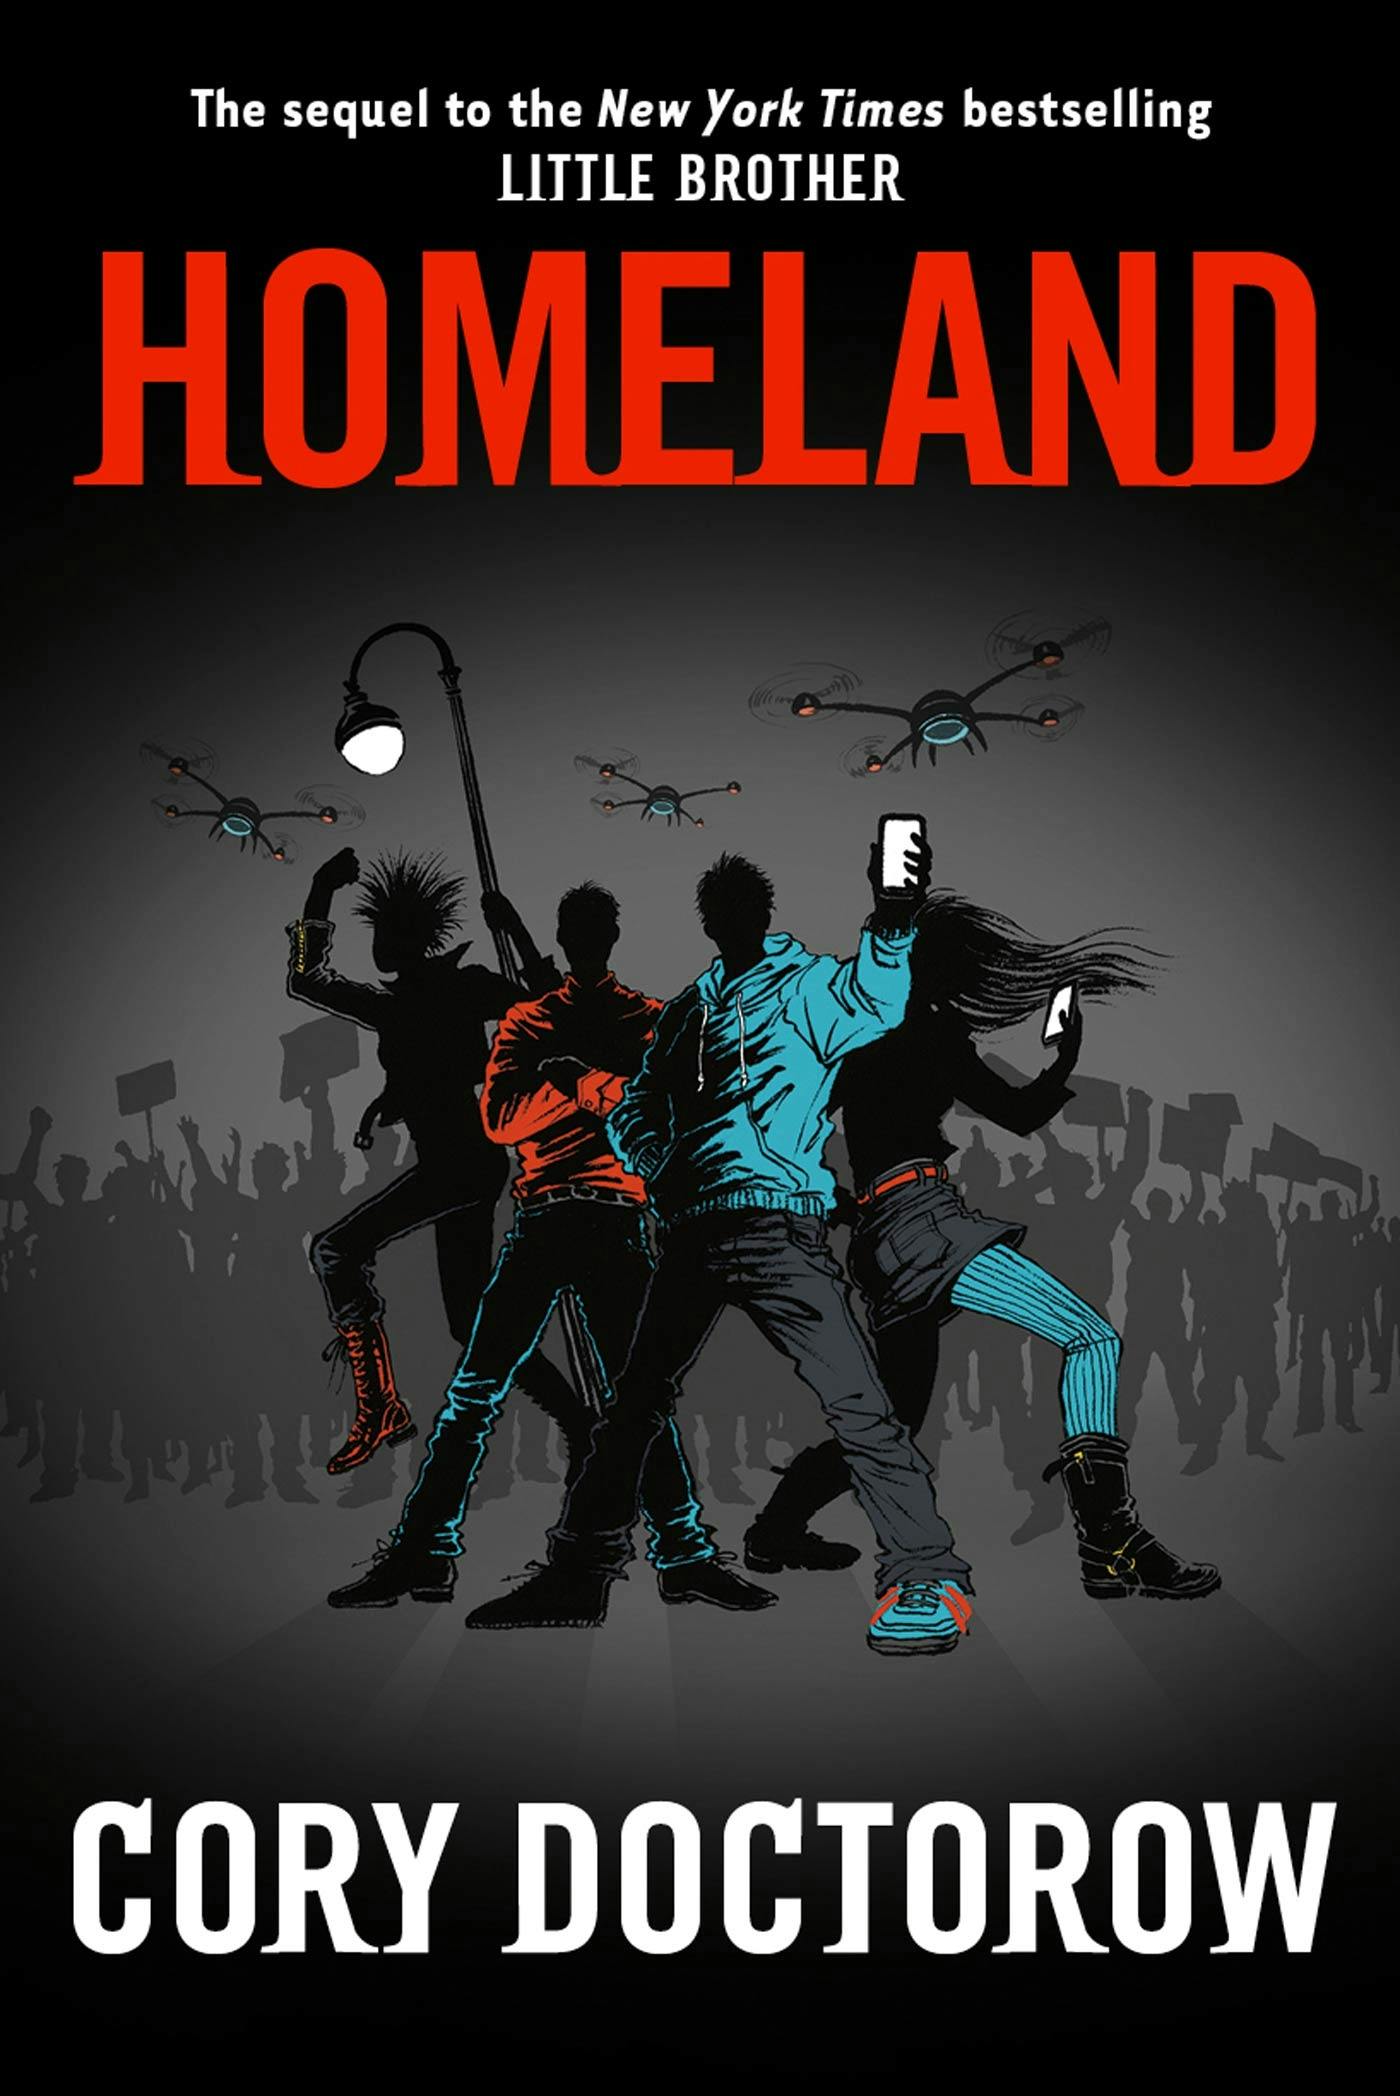 Cover for the book titled as: Homeland